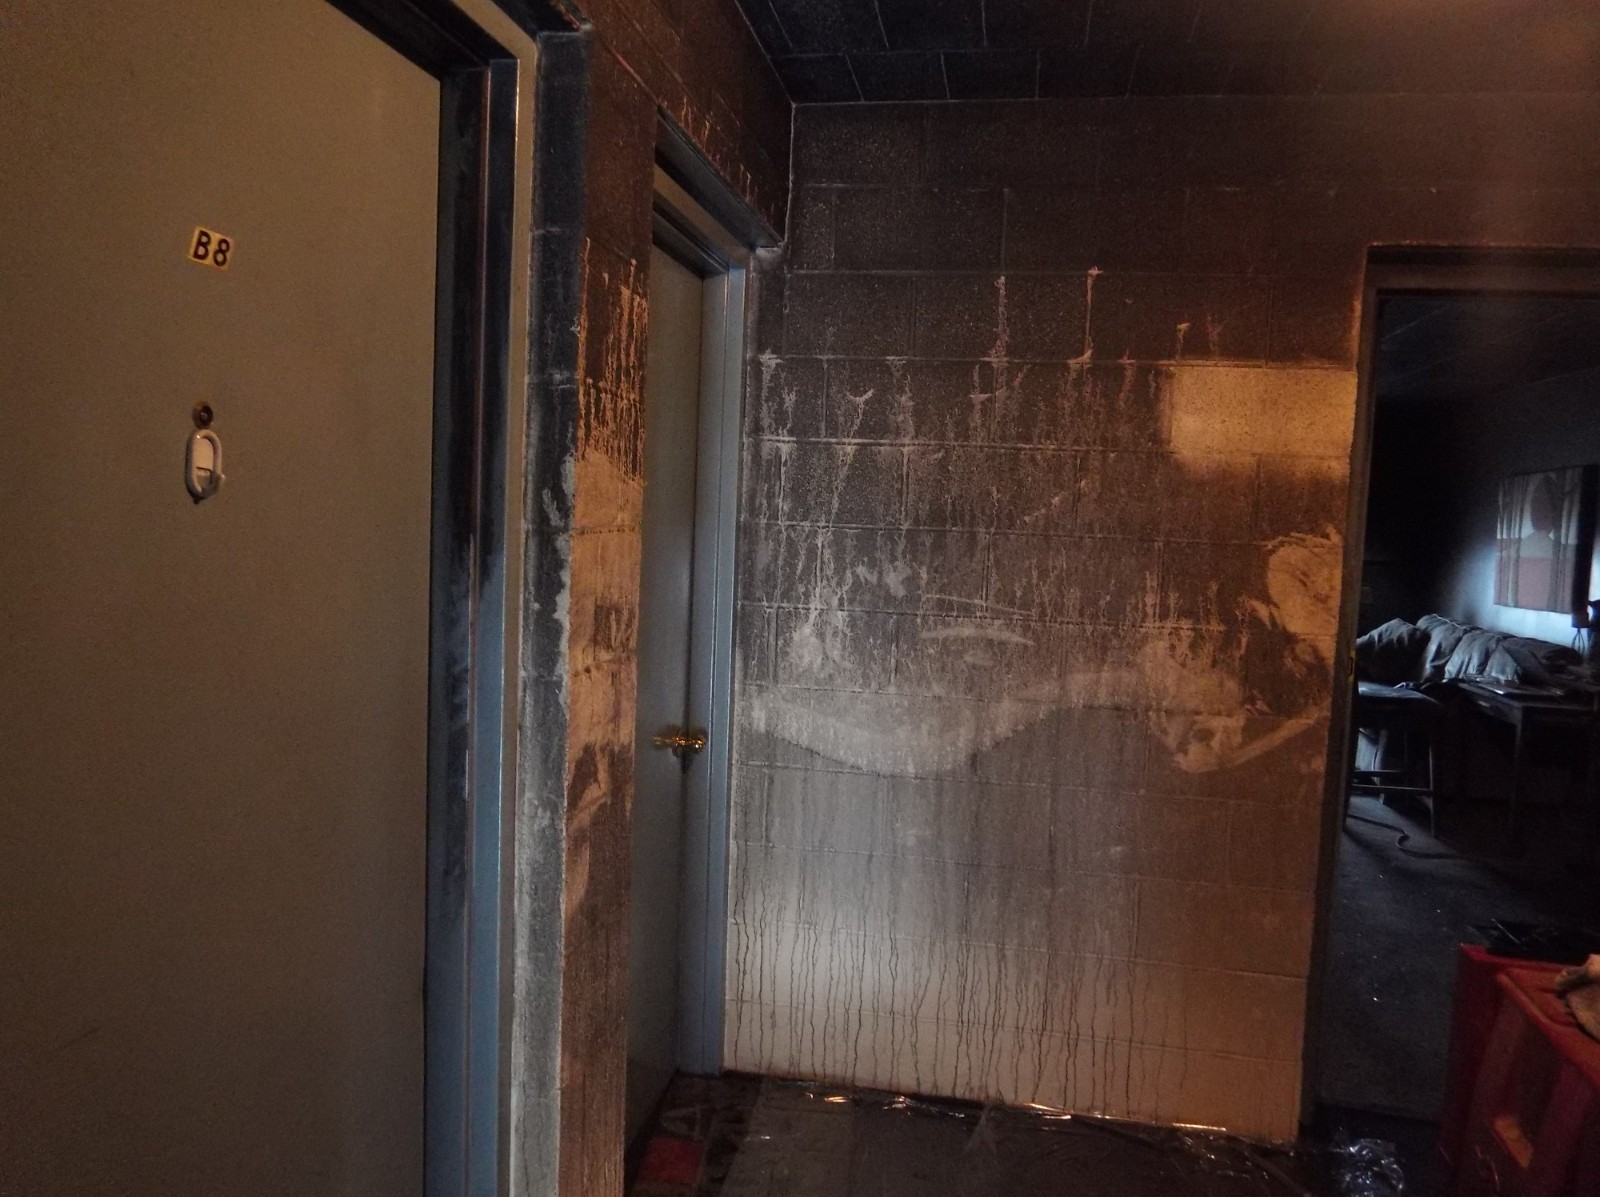 Fire damage restoration and cleanup is no problem for our SERVPRO of Ebensburg team.